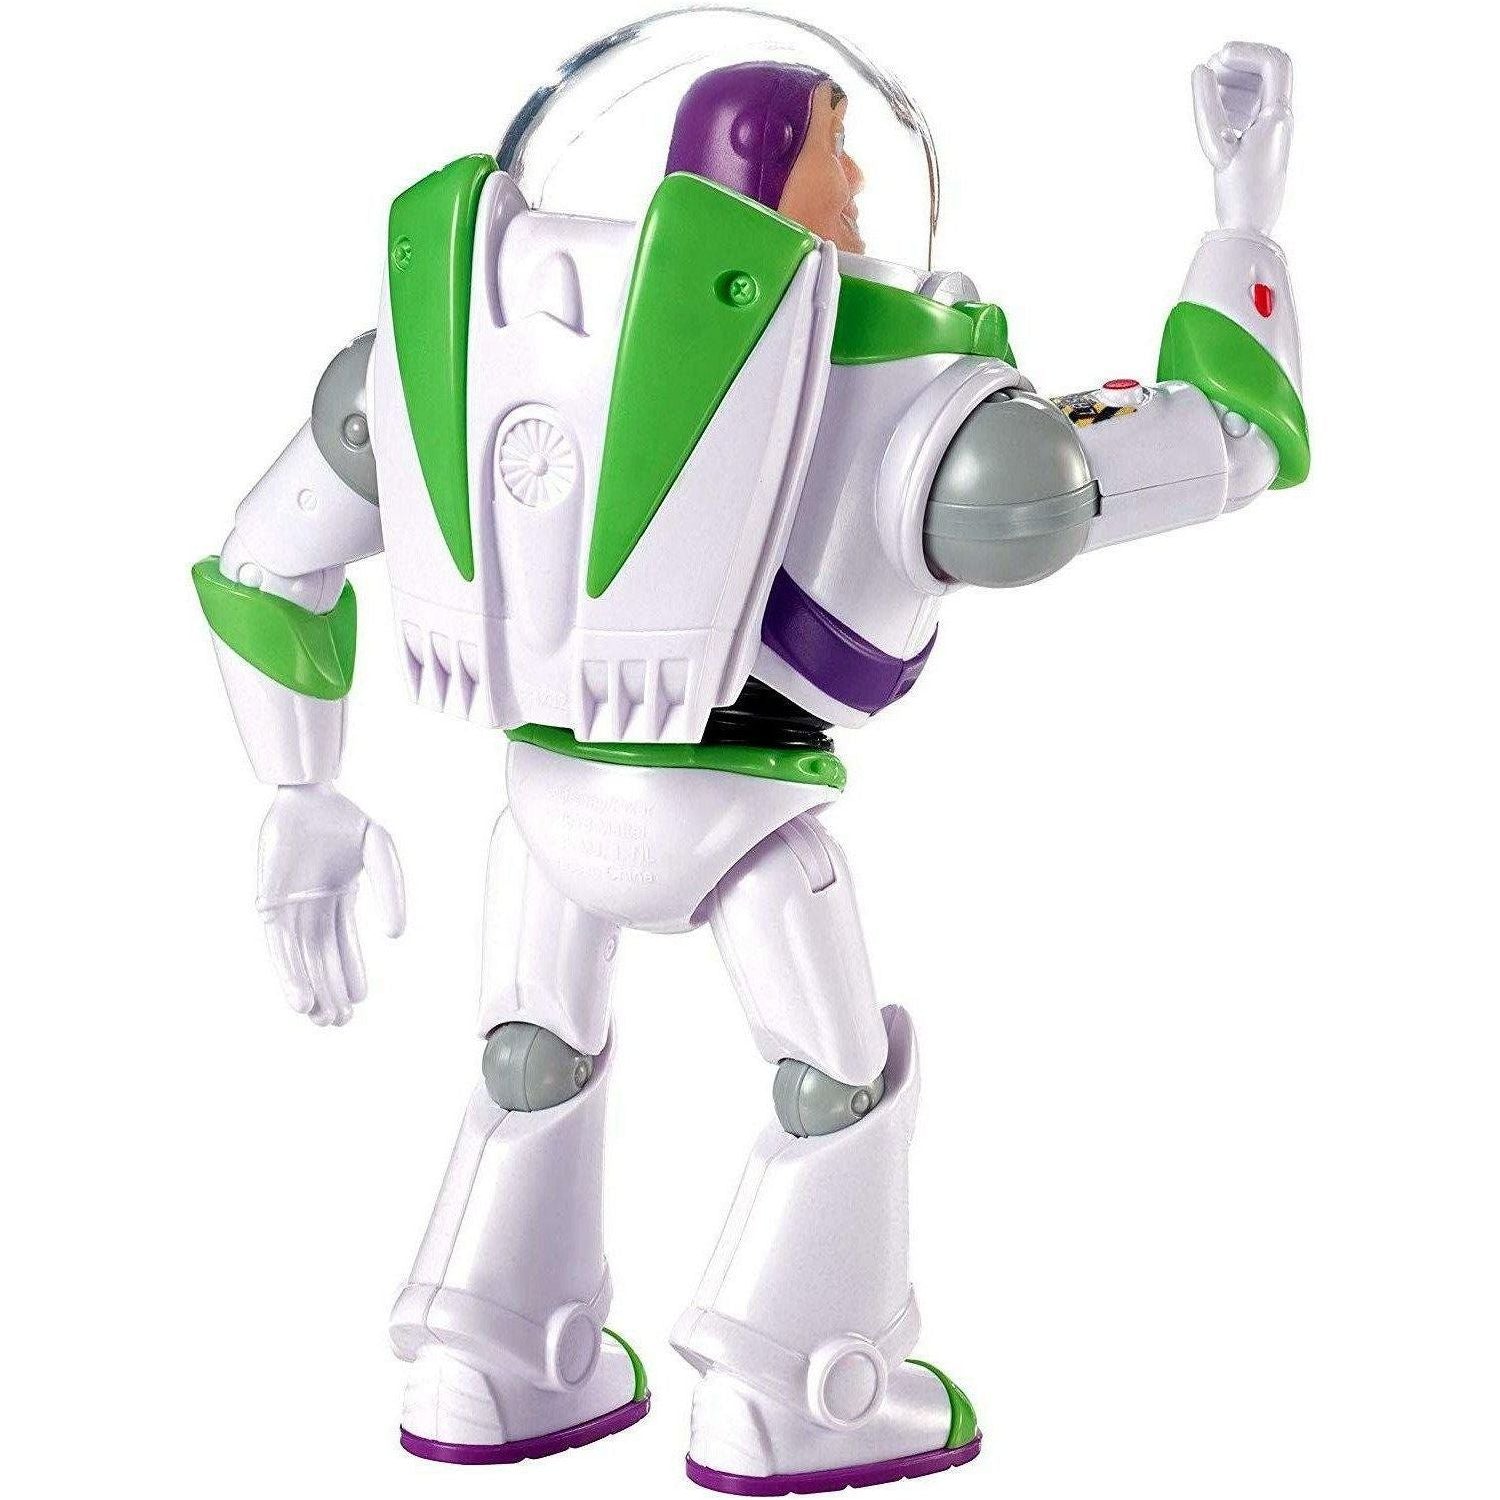 Disney Pixar Toy Story Buzz with Shield Figure - BumbleToys - 5-7 Years, Boys, Buzz light year, Figures, Toy Story